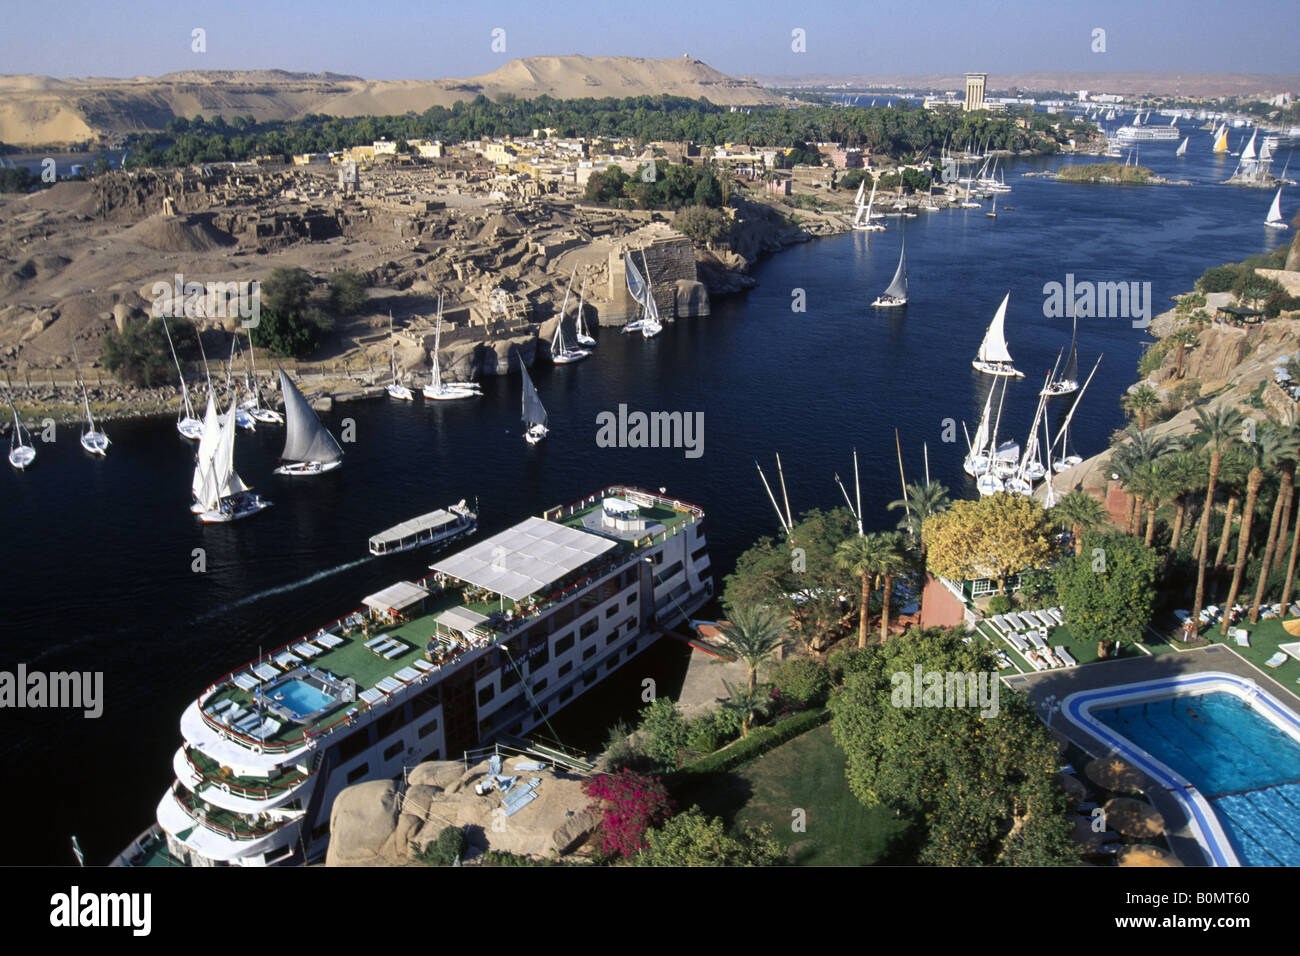 Cruiser in front of the Old Cataract Hotel at Nile River in Asswan Egypt Stock Photo